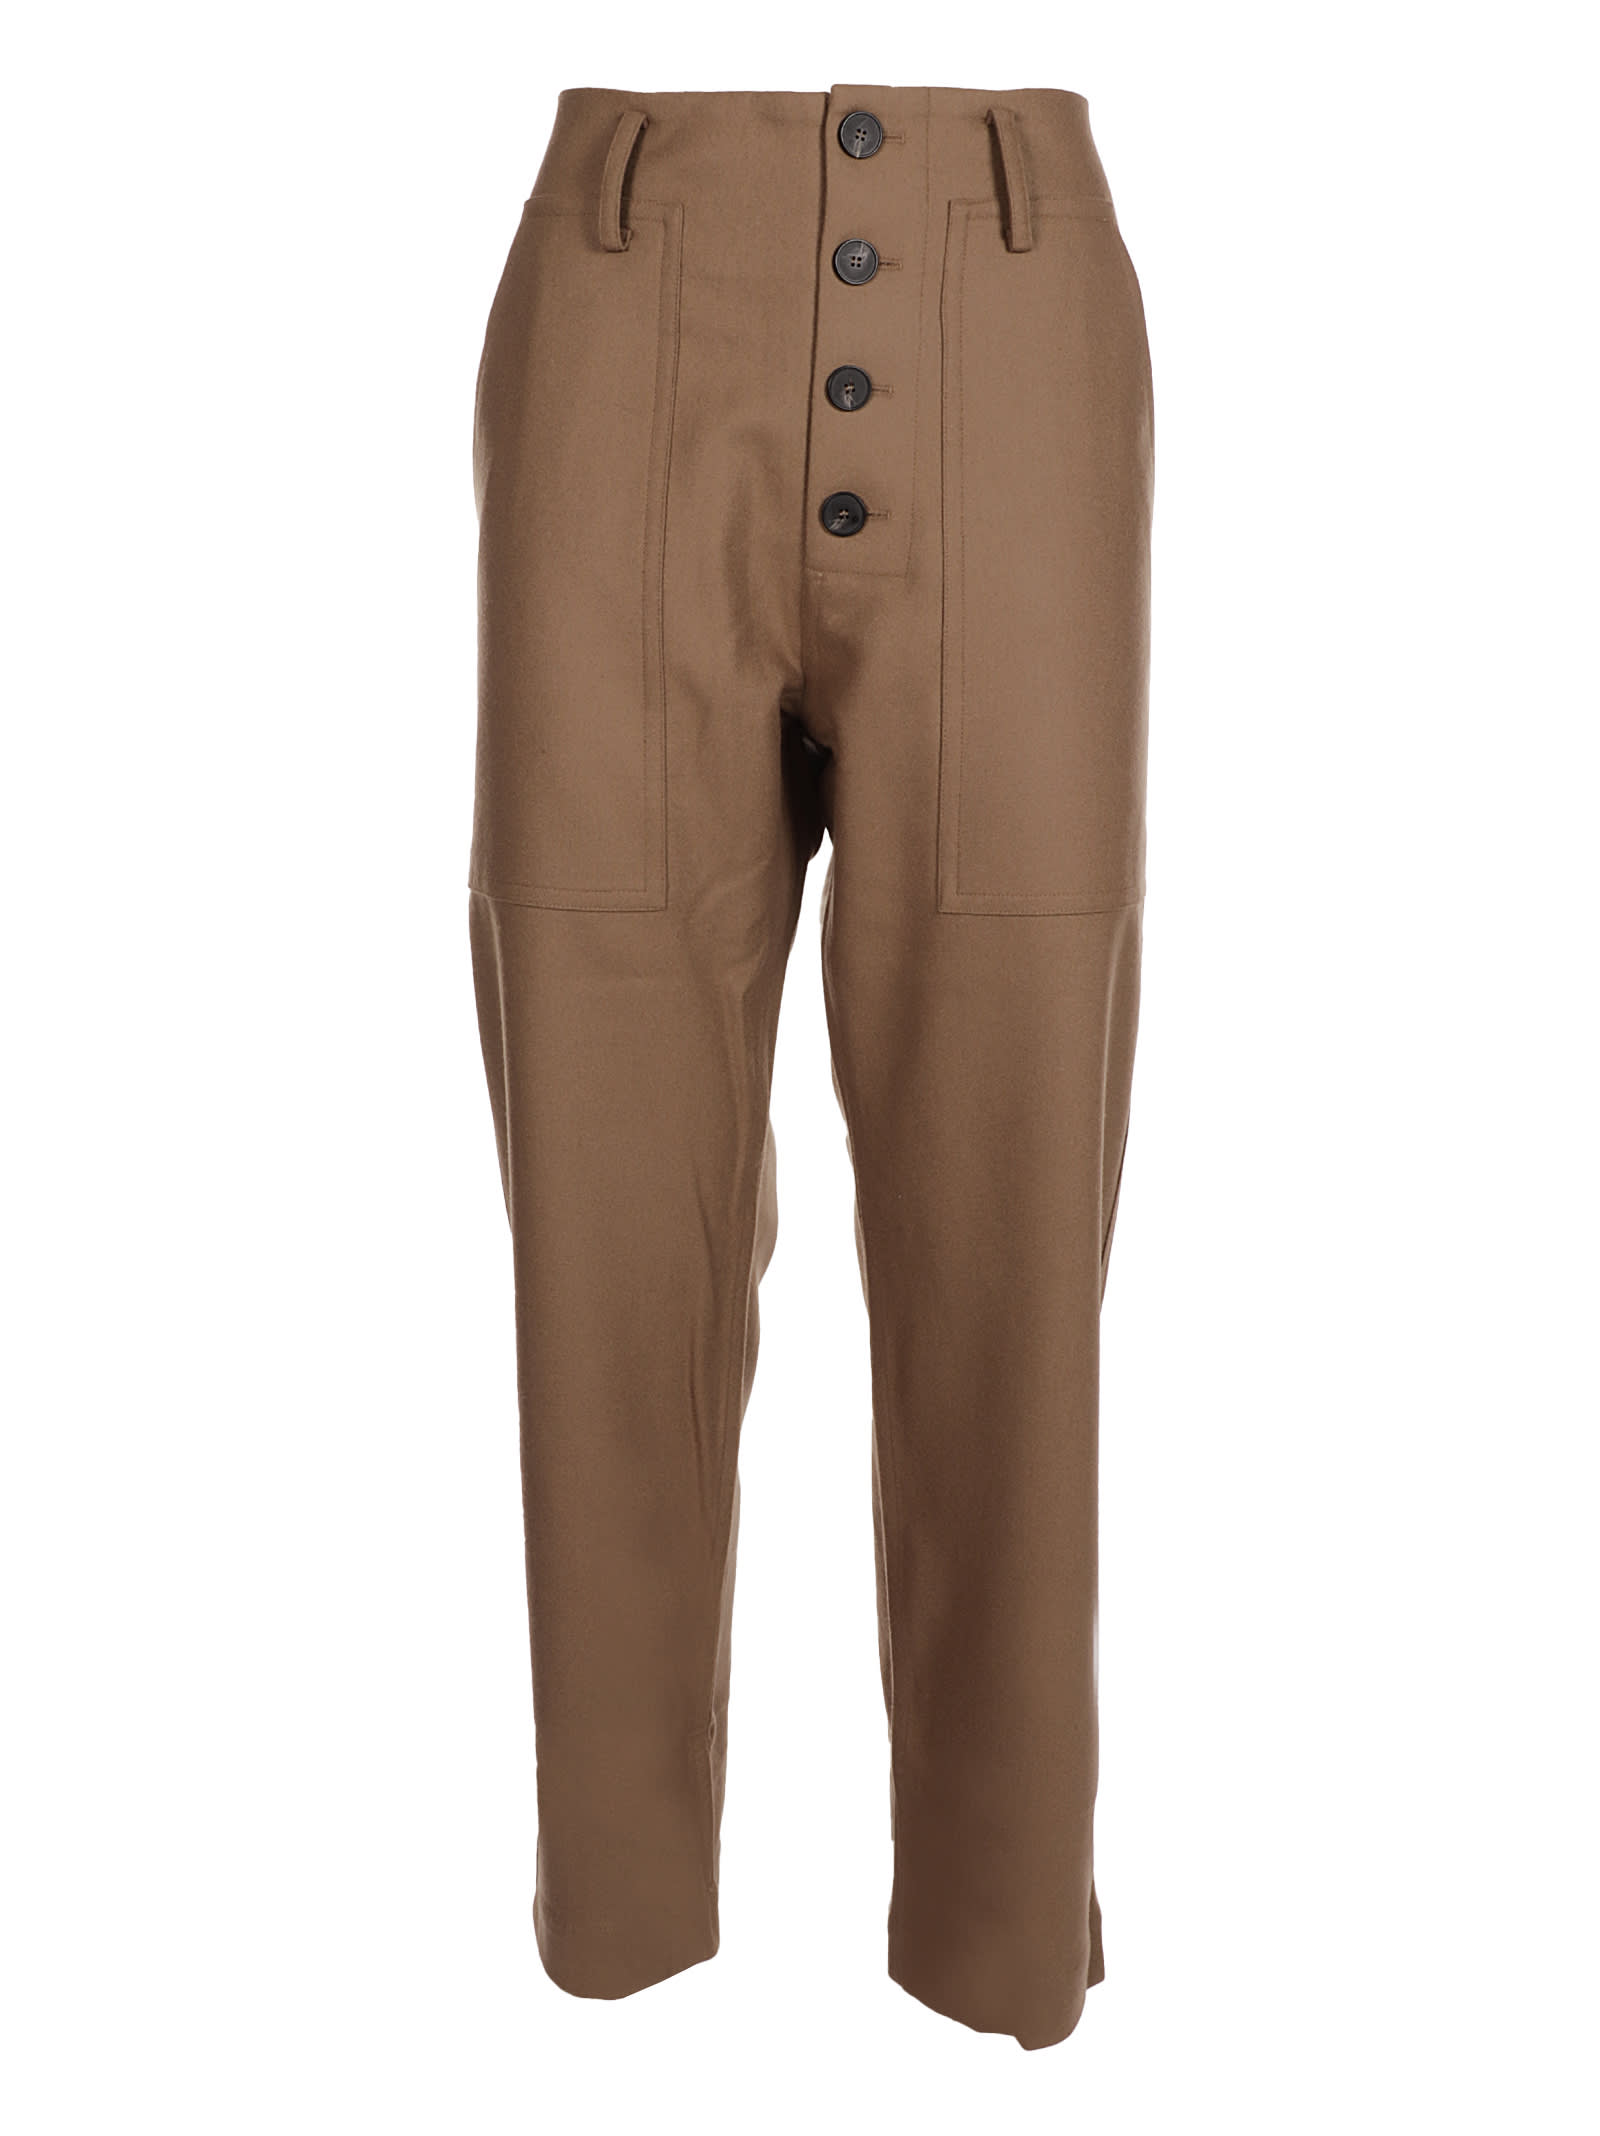 Sofie dHoore Buttoned Pants